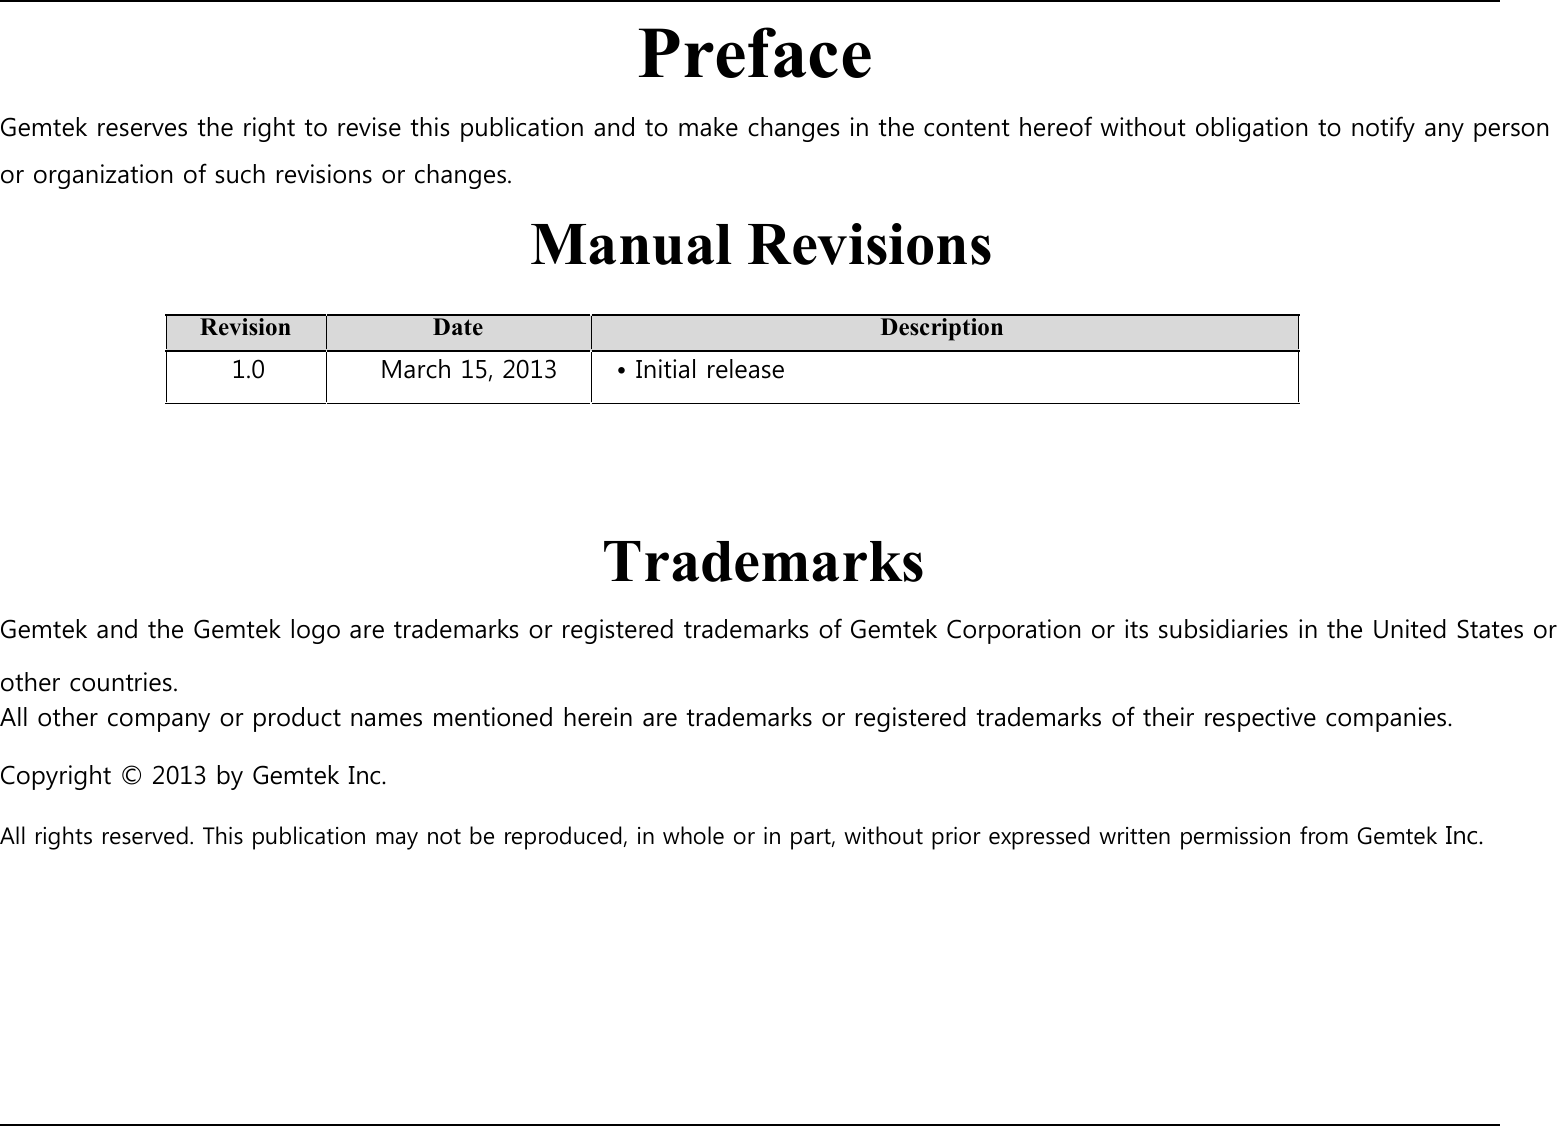 Preface Gemtek reserves the right to revise this publication and to make changes in the content hereof without obligation to notify any person or organization of such revisions or changes. Manual Revisions  Revision 1.0  Date March 15, 2013    • Initial release  Description       Trademarks Gemtek and the Gemtek logo are trademarks or registered trademarks of Gemtek Corporation or its subsidiaries in the United States or other countries. All other company or product names mentioned herein are trademarks or registered trademarks of their respective companies.  Copyright © 2013 by Gemtek Inc.  All rights reserved. This publication may not be reproduced, in whole or in part, without prior expressed written permission from Gemtek Inc.                             